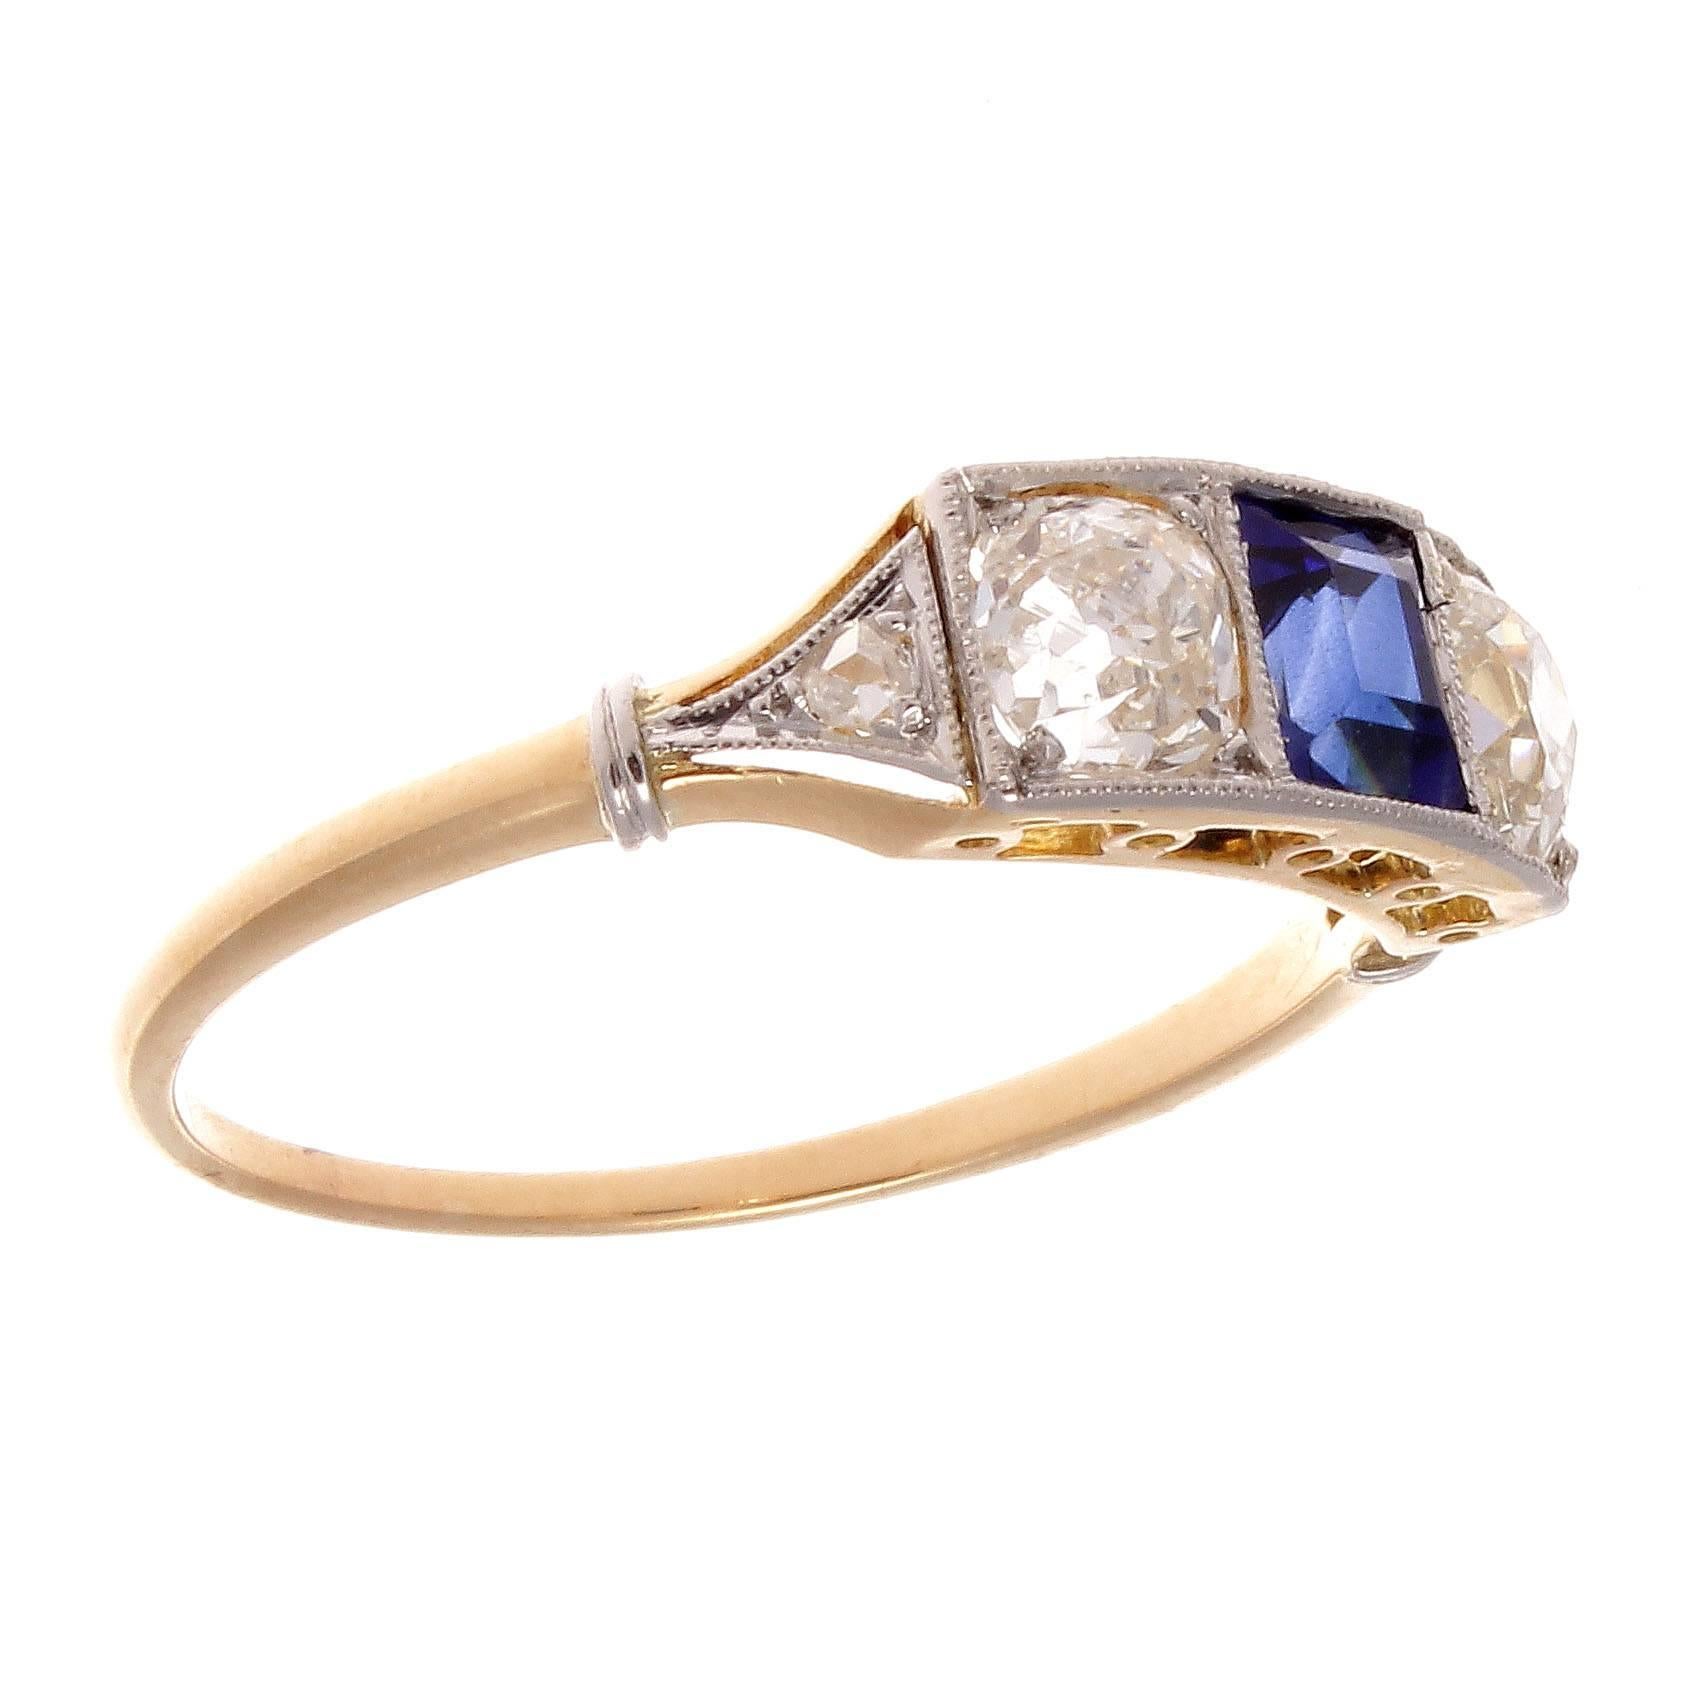 Extravagance that rebuilt Europe after the first World War by fusing geometry and symmetry to create masterpieces that still have heavy influences on art and fashion today. Featuring an approximately 0.75 carat bright blue sapphire that is accented